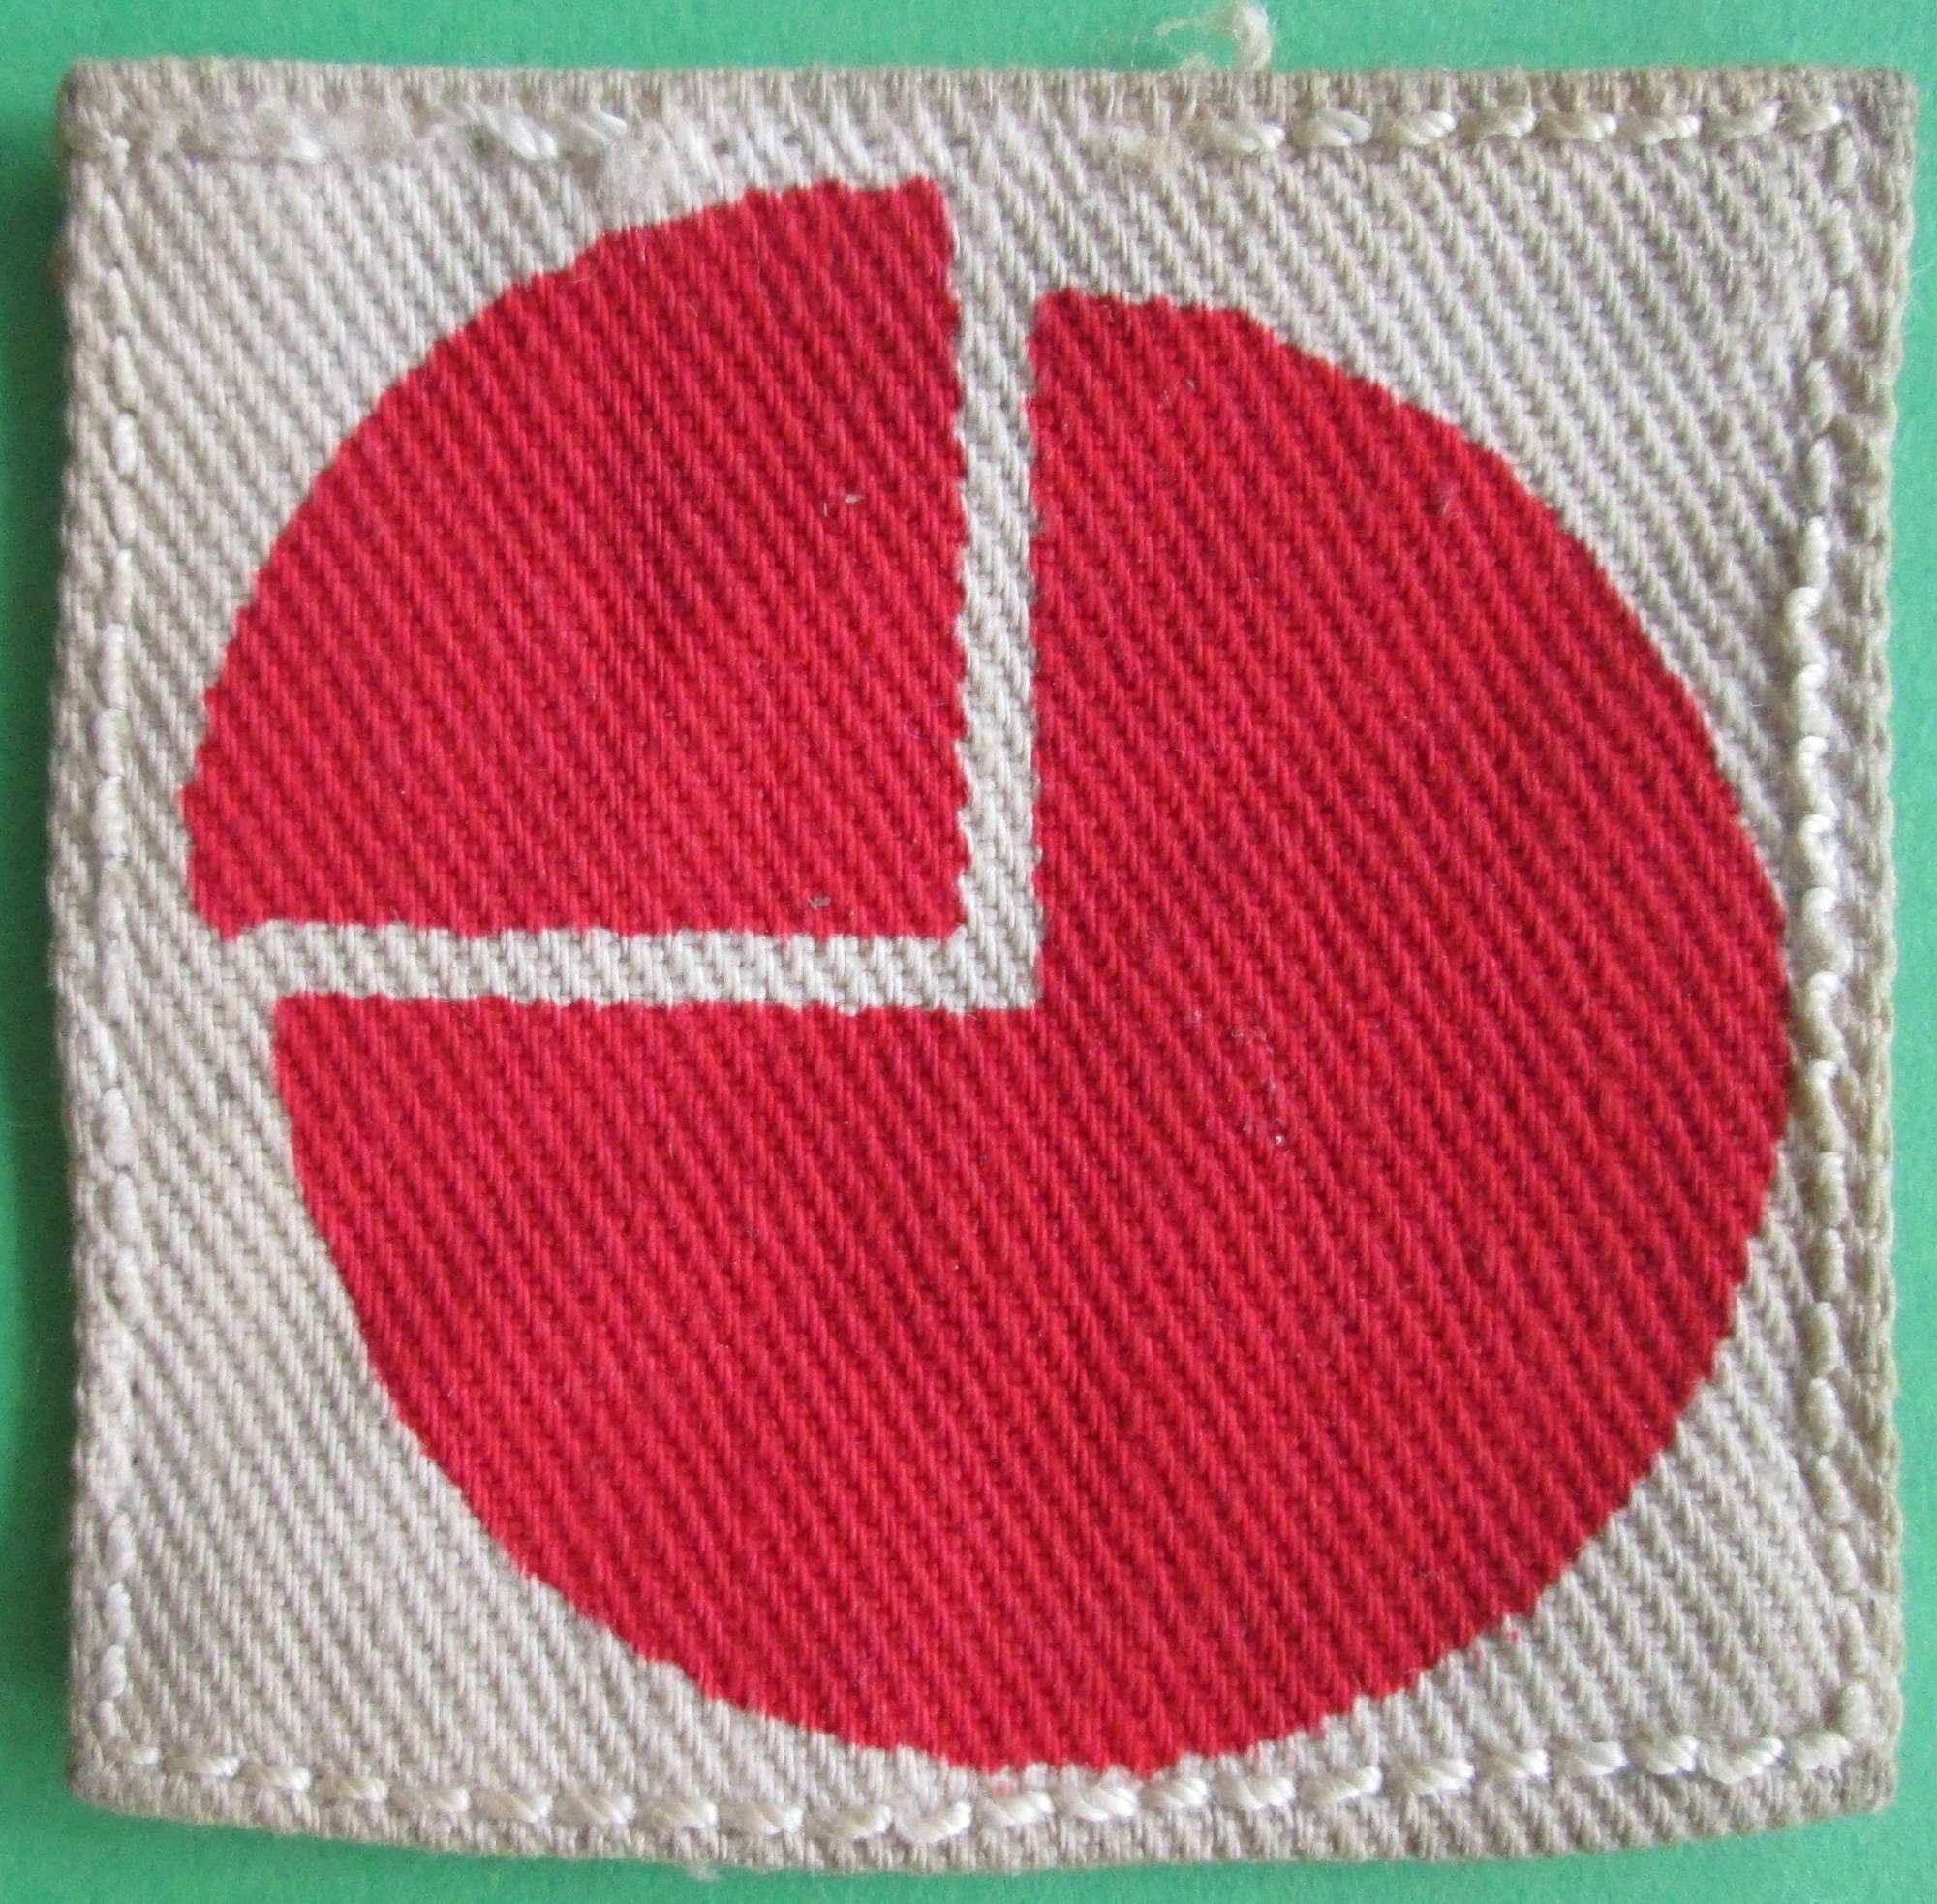 A 4TH INFANTRY DIVISION 2ND PATTERN FORMATION SIGN